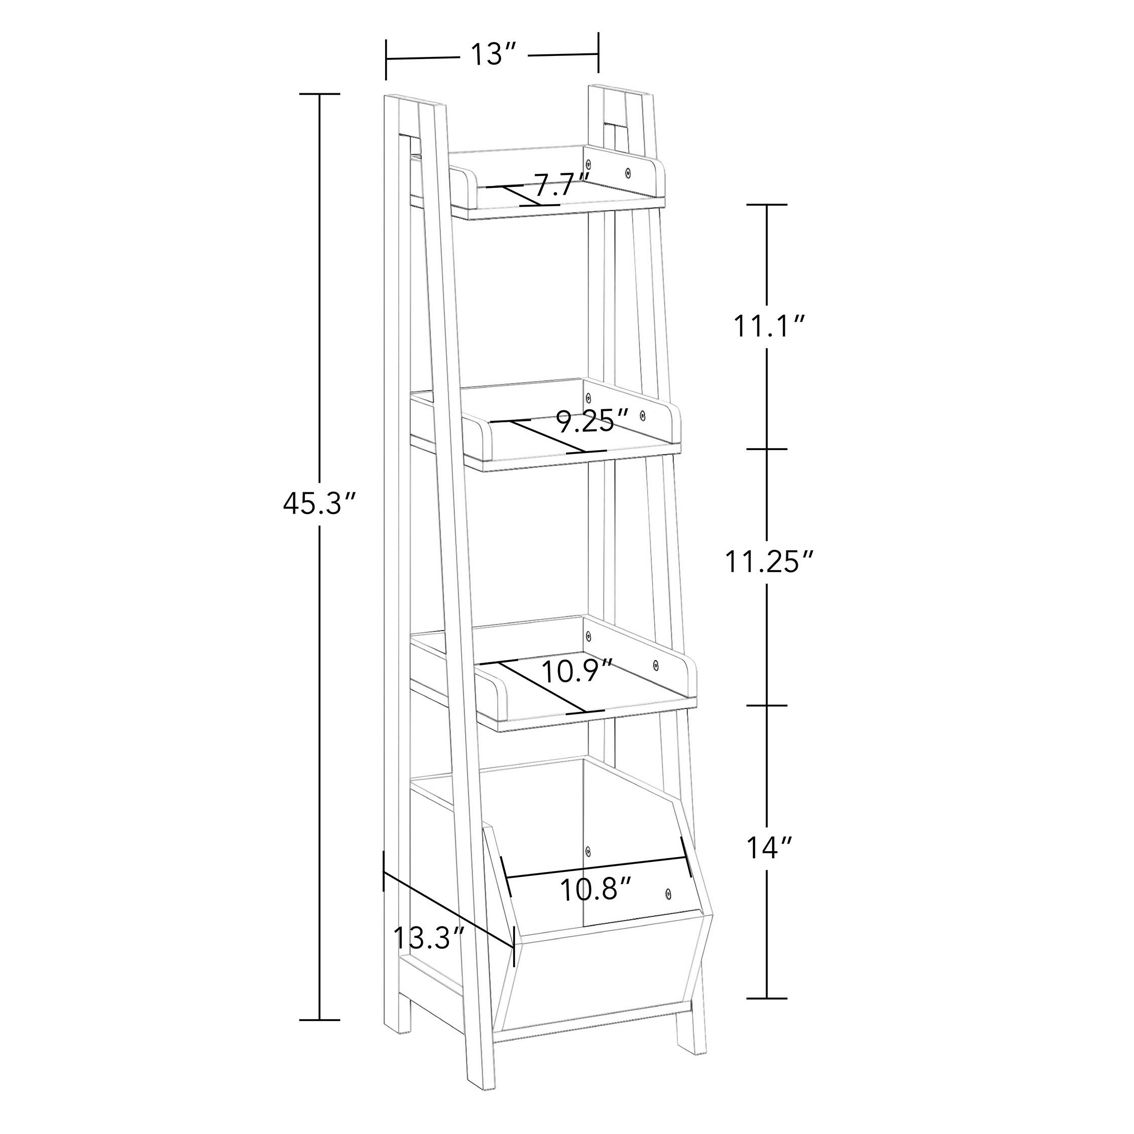 RiverRidge Kids 4-Tier 13in Ladder Shelf with Toy Organizer and 2pc Bins - Image 3 of 5